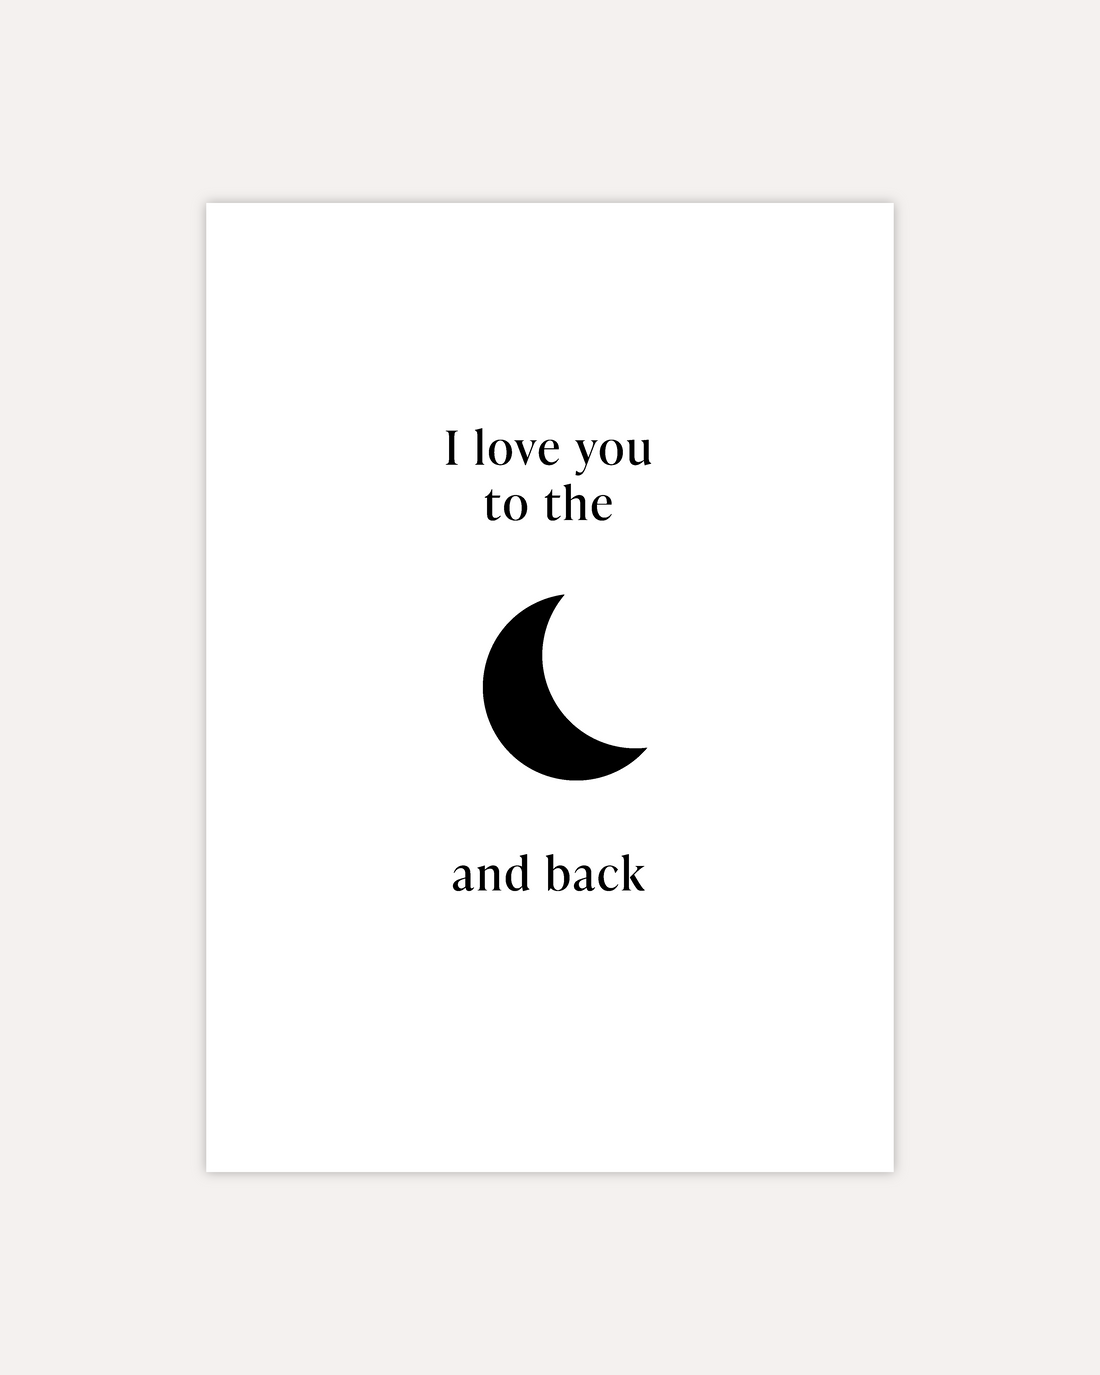 A postcard design showing a simple black moon symbol in the middle with text above it saying &quot;I love you to the&quot; and text below it saying &quot;and back&quot;. The design is shown on a beige background.